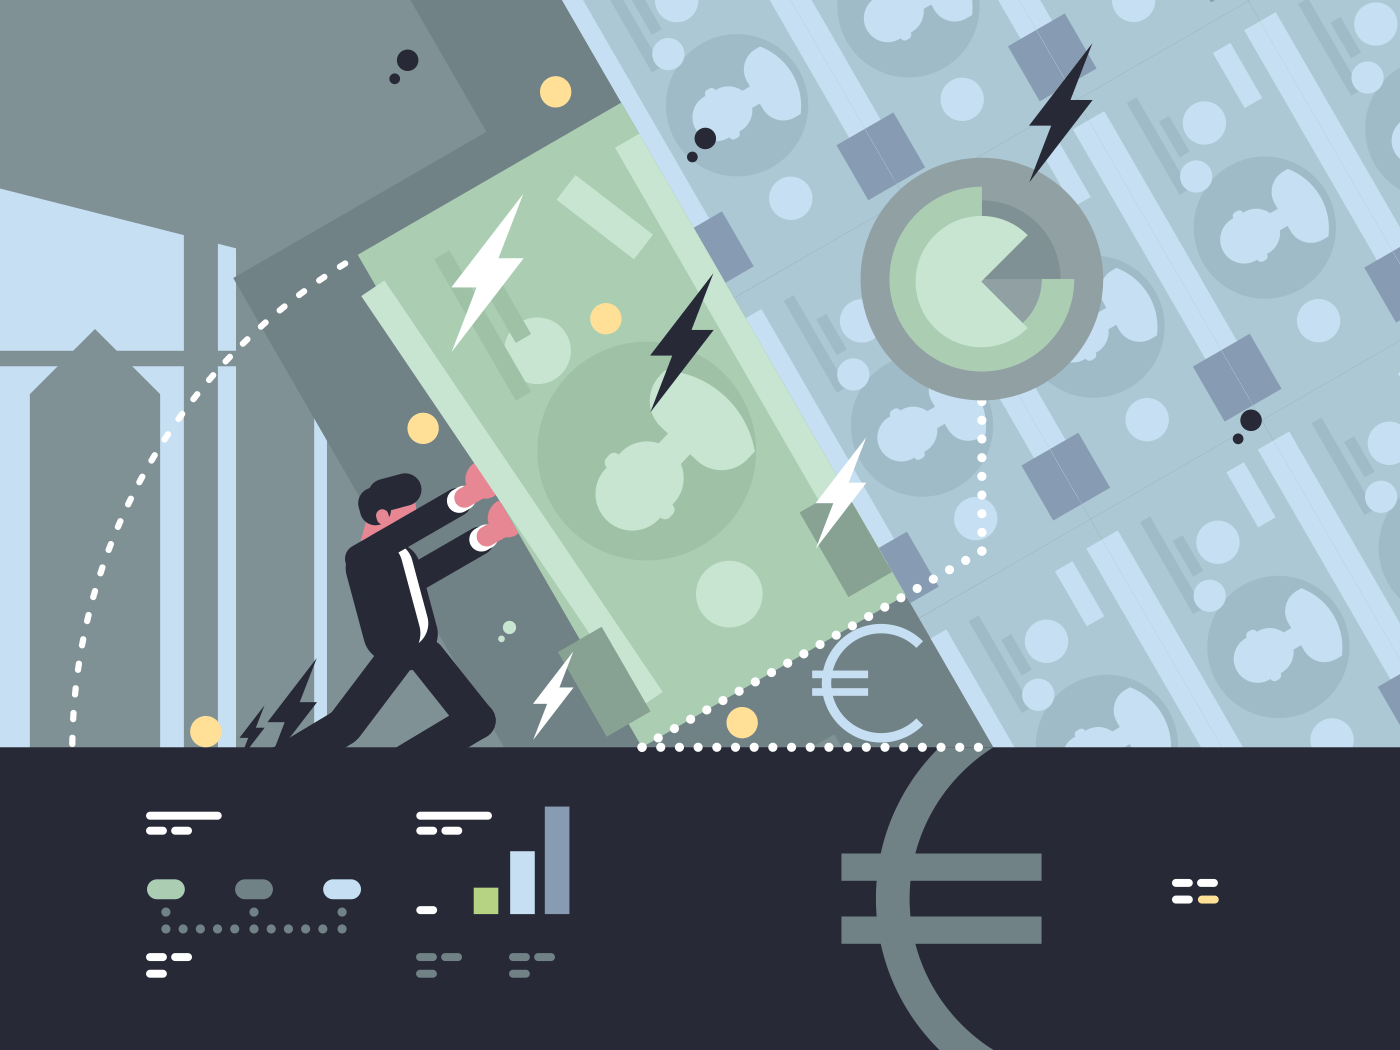 Collapse and fall of bank. Banker tries save bank from bankruptcy. Vector illustration